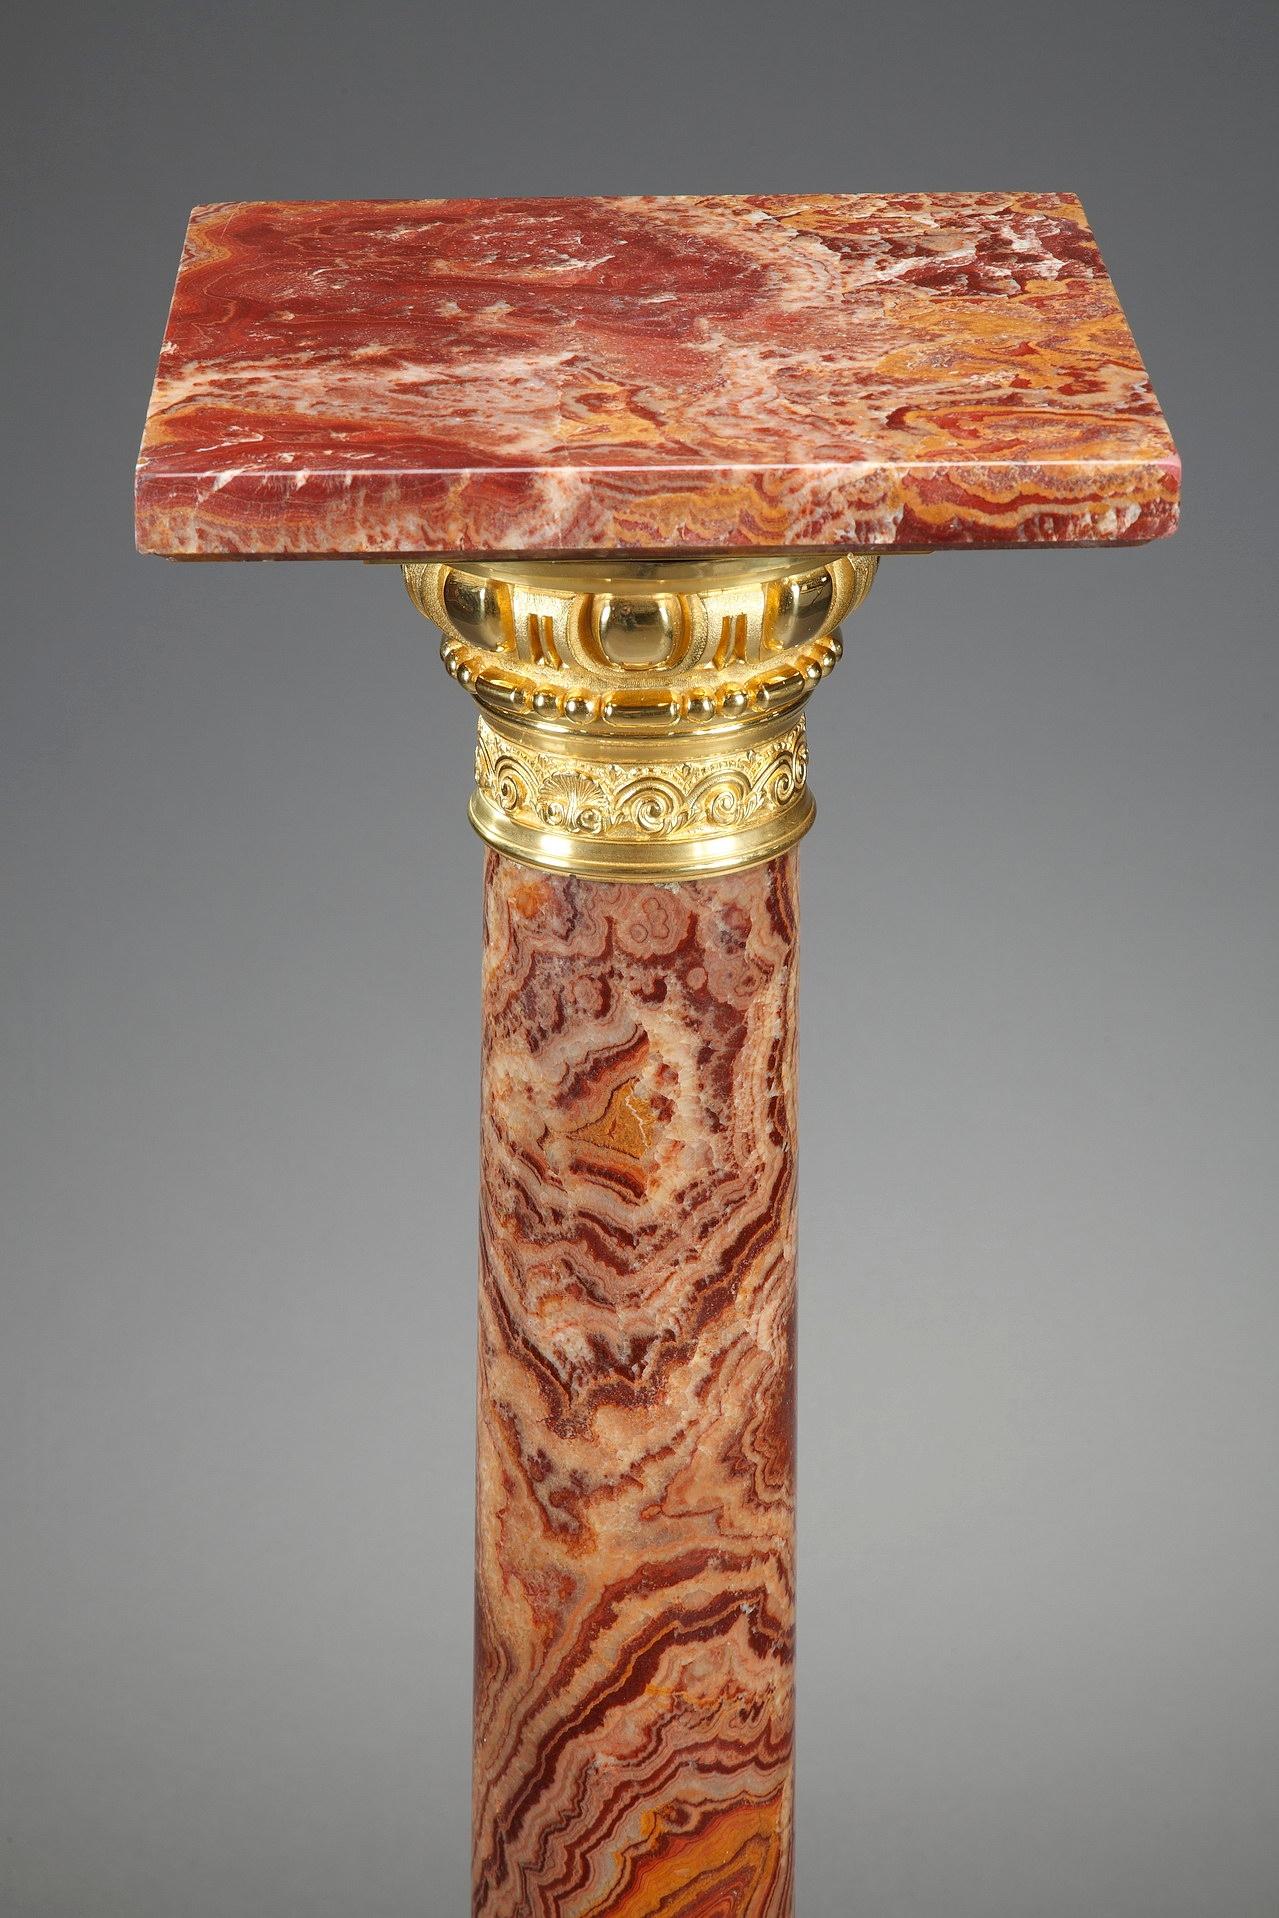 Louis XVI-style pedestal with a rotating display plate. Crafted in pink marble the late 19th century, this neoclassical column is highlighted with gilt bronze accents: ova, waves, shells and laurel crown. It is set upon a square, terraced base and